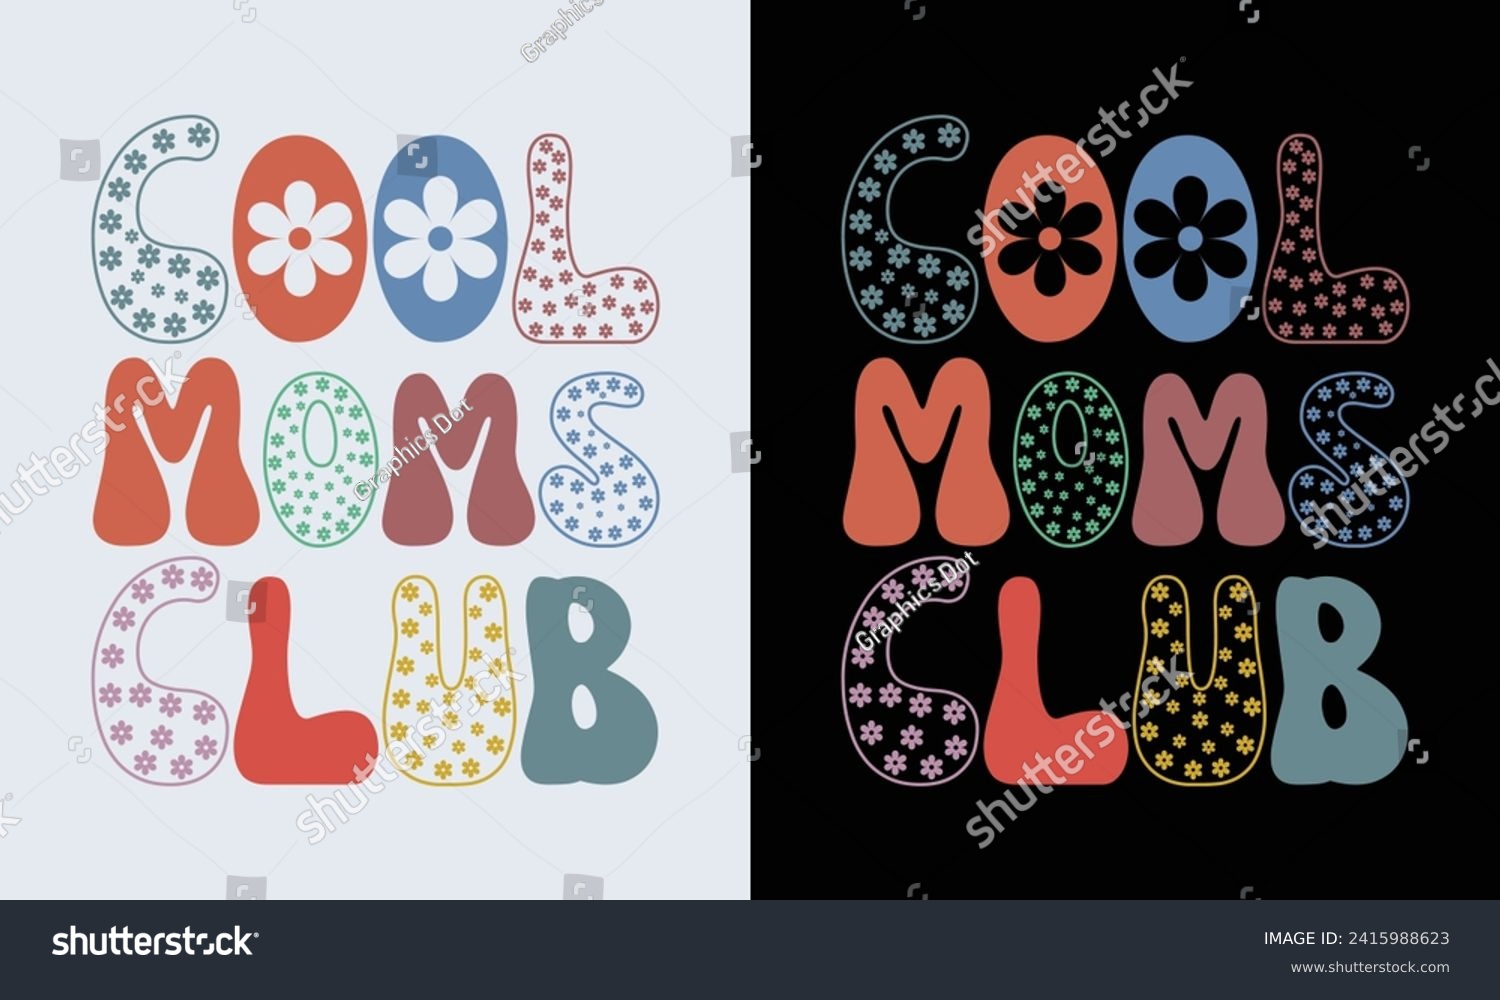 SVG of Cool moms club quote retro wavy colorful Design,Best Mom Day Design,gift, lover,Cool Moms Club Retro Design,Mom Cut File,Happy Mother's Day Design svg